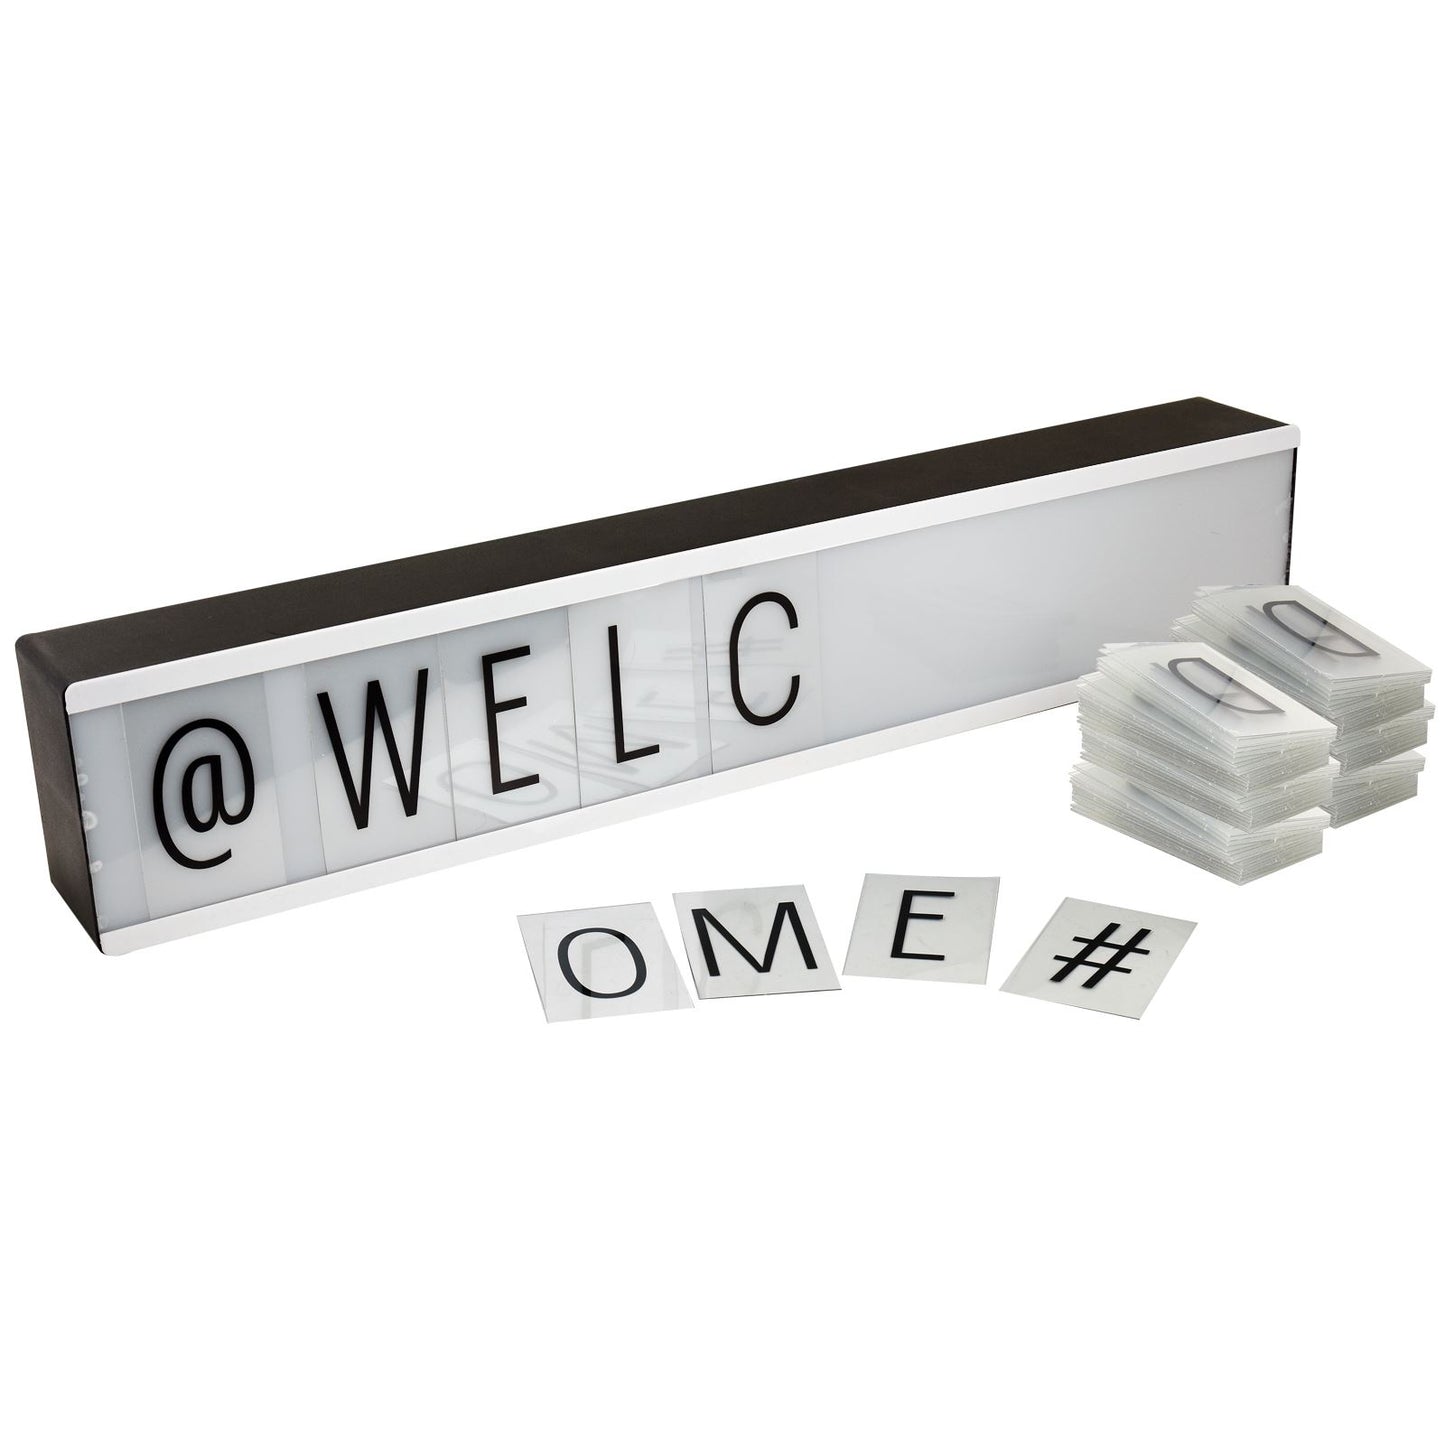 Customizable A4 Cinematic Lightbox with Letters for Personalized Messages